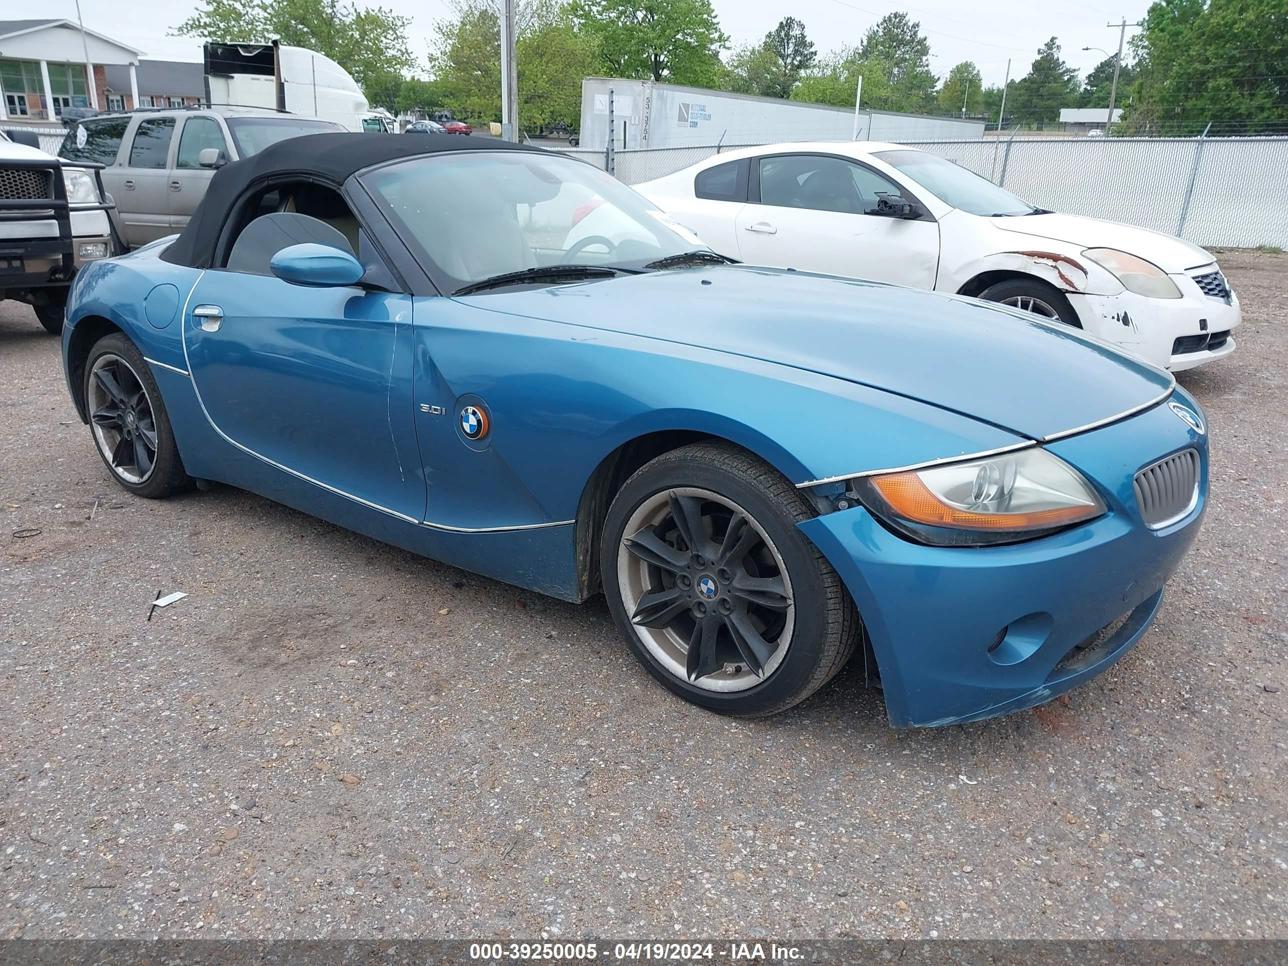 vin: 4USBT534X3LU01631 4USBT534X3LU01631 2003 bmw z4 3000 for Sale in 38118, 5400 Getwell Road, Memphis, Tennessee, USA